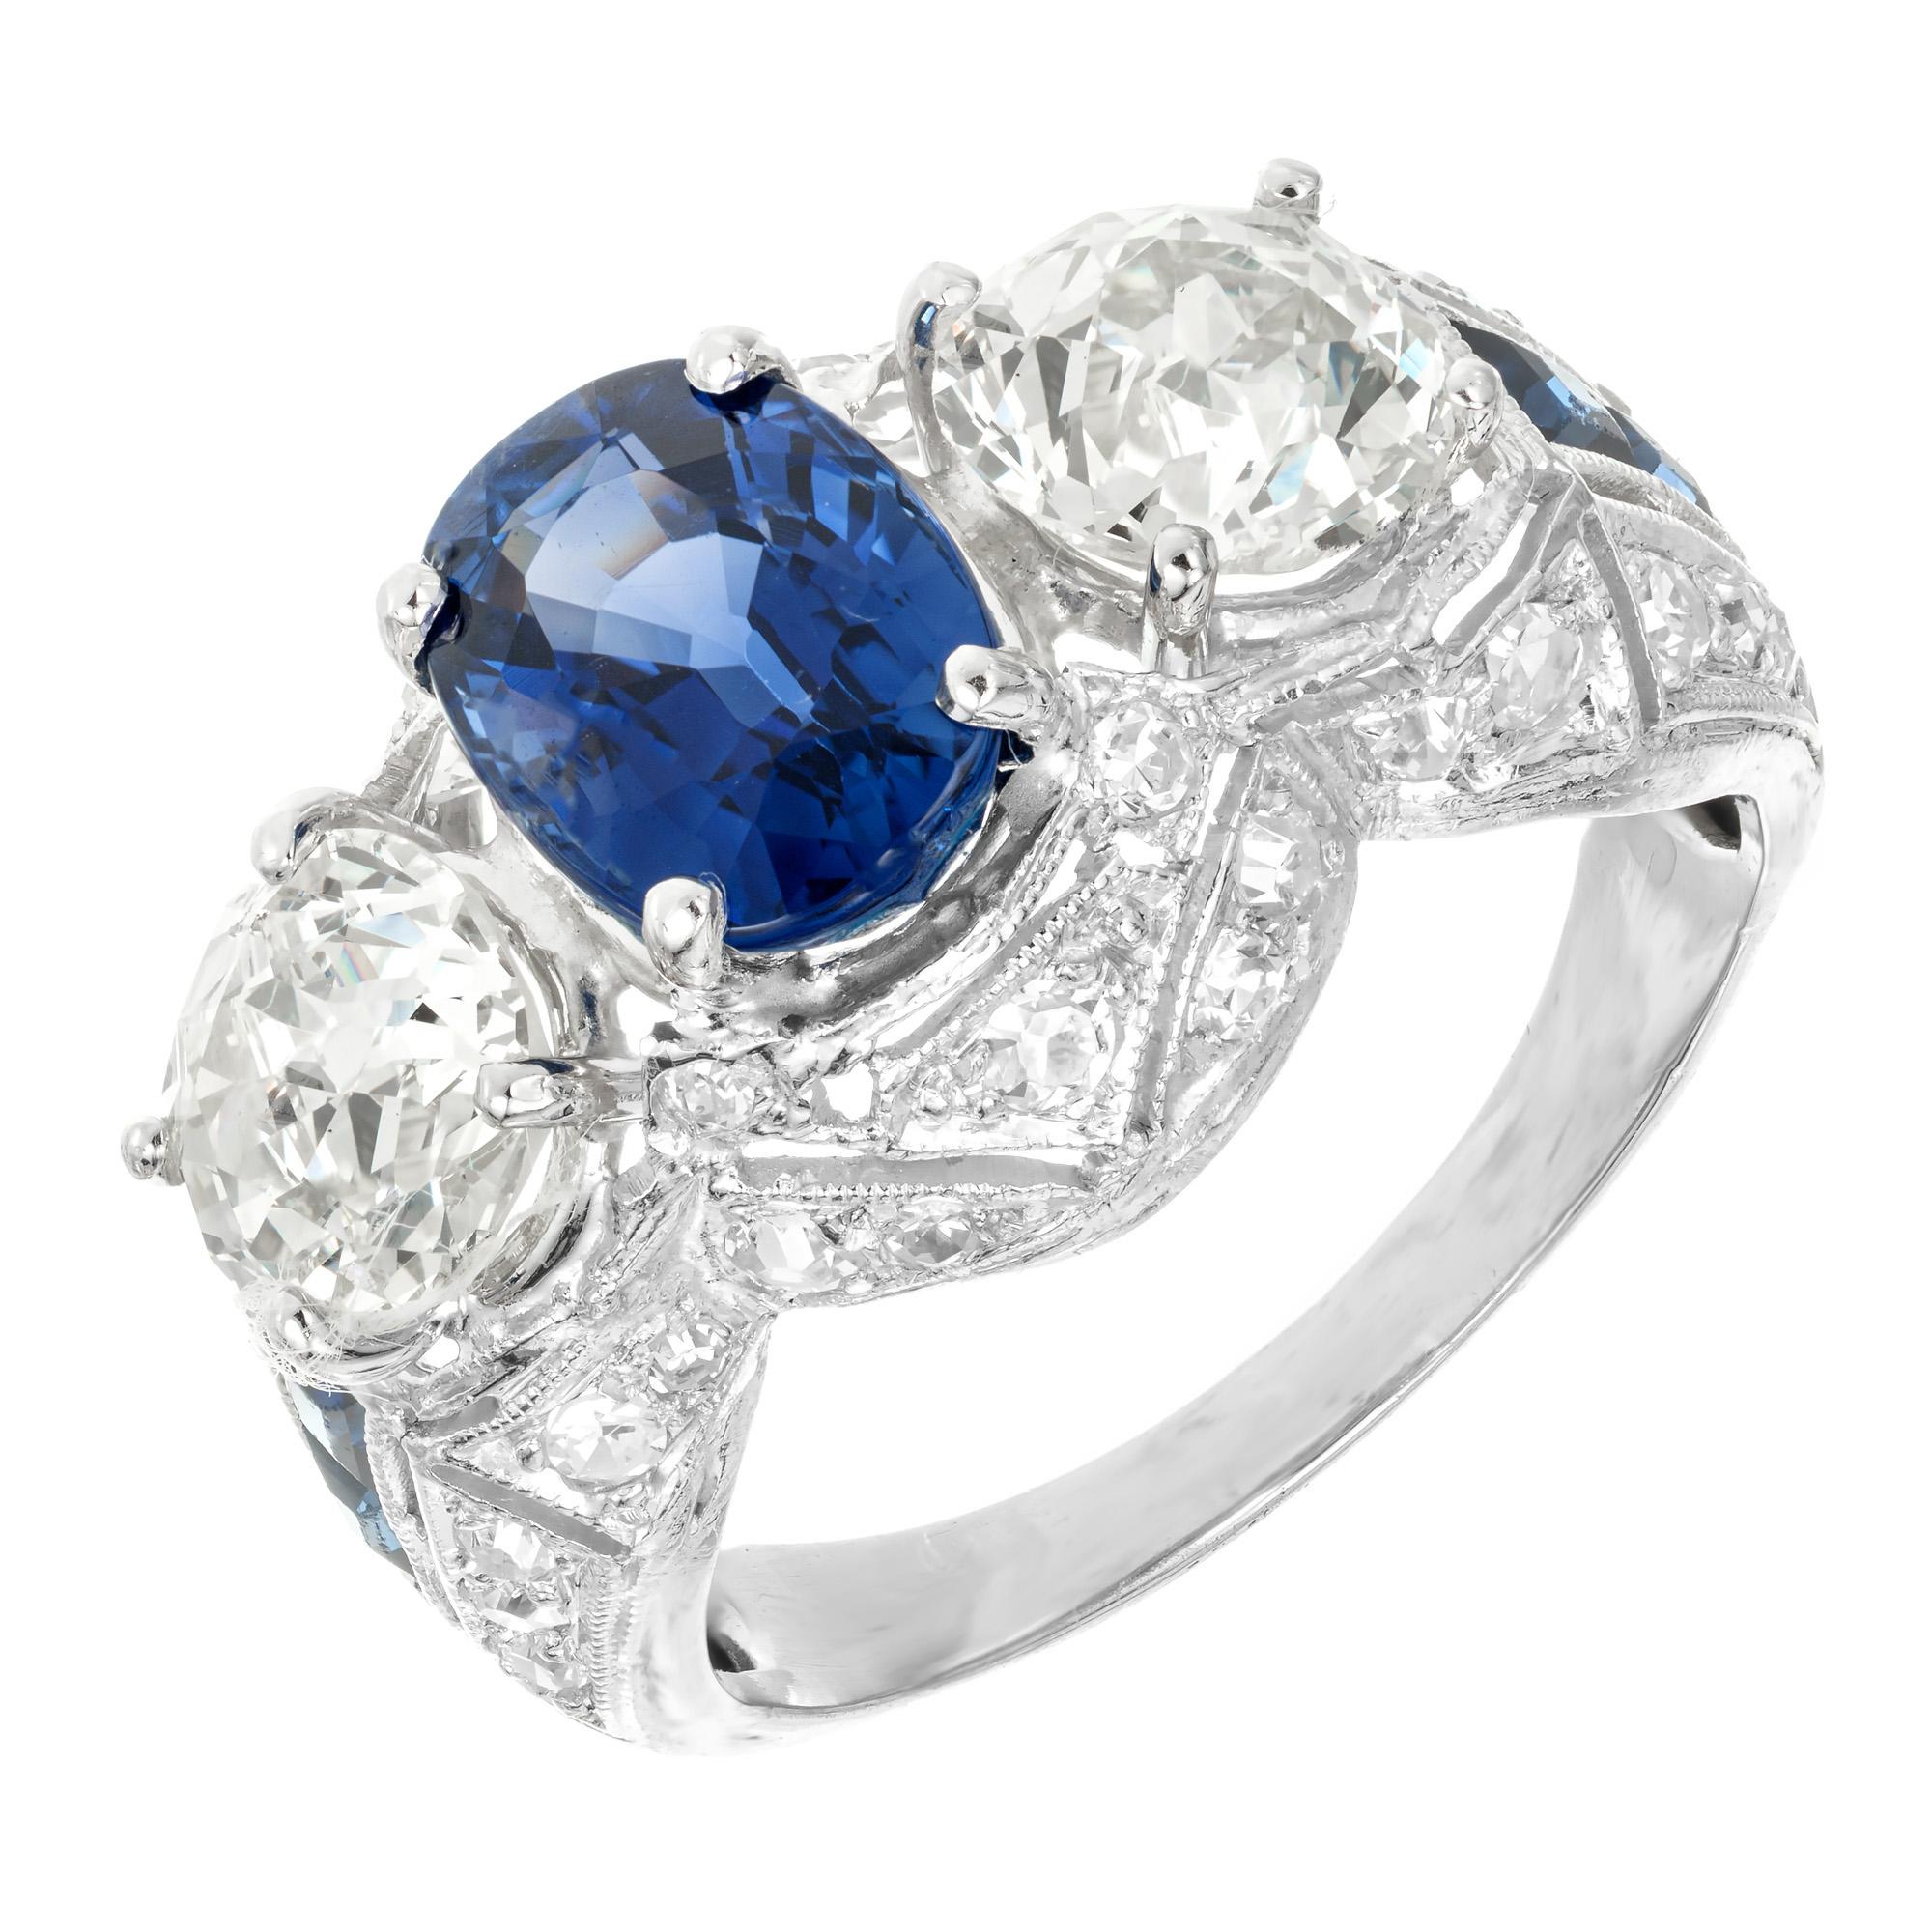 Cornflower Blue Oval Sapphire and diamond engagement ring. GIA certified 2.49cts oval center stone in platinum setting with 2 old mine cut side diamonds and accented with 36 round diamonds and 4 calibre cut sapphires. Natural no heat cornflower